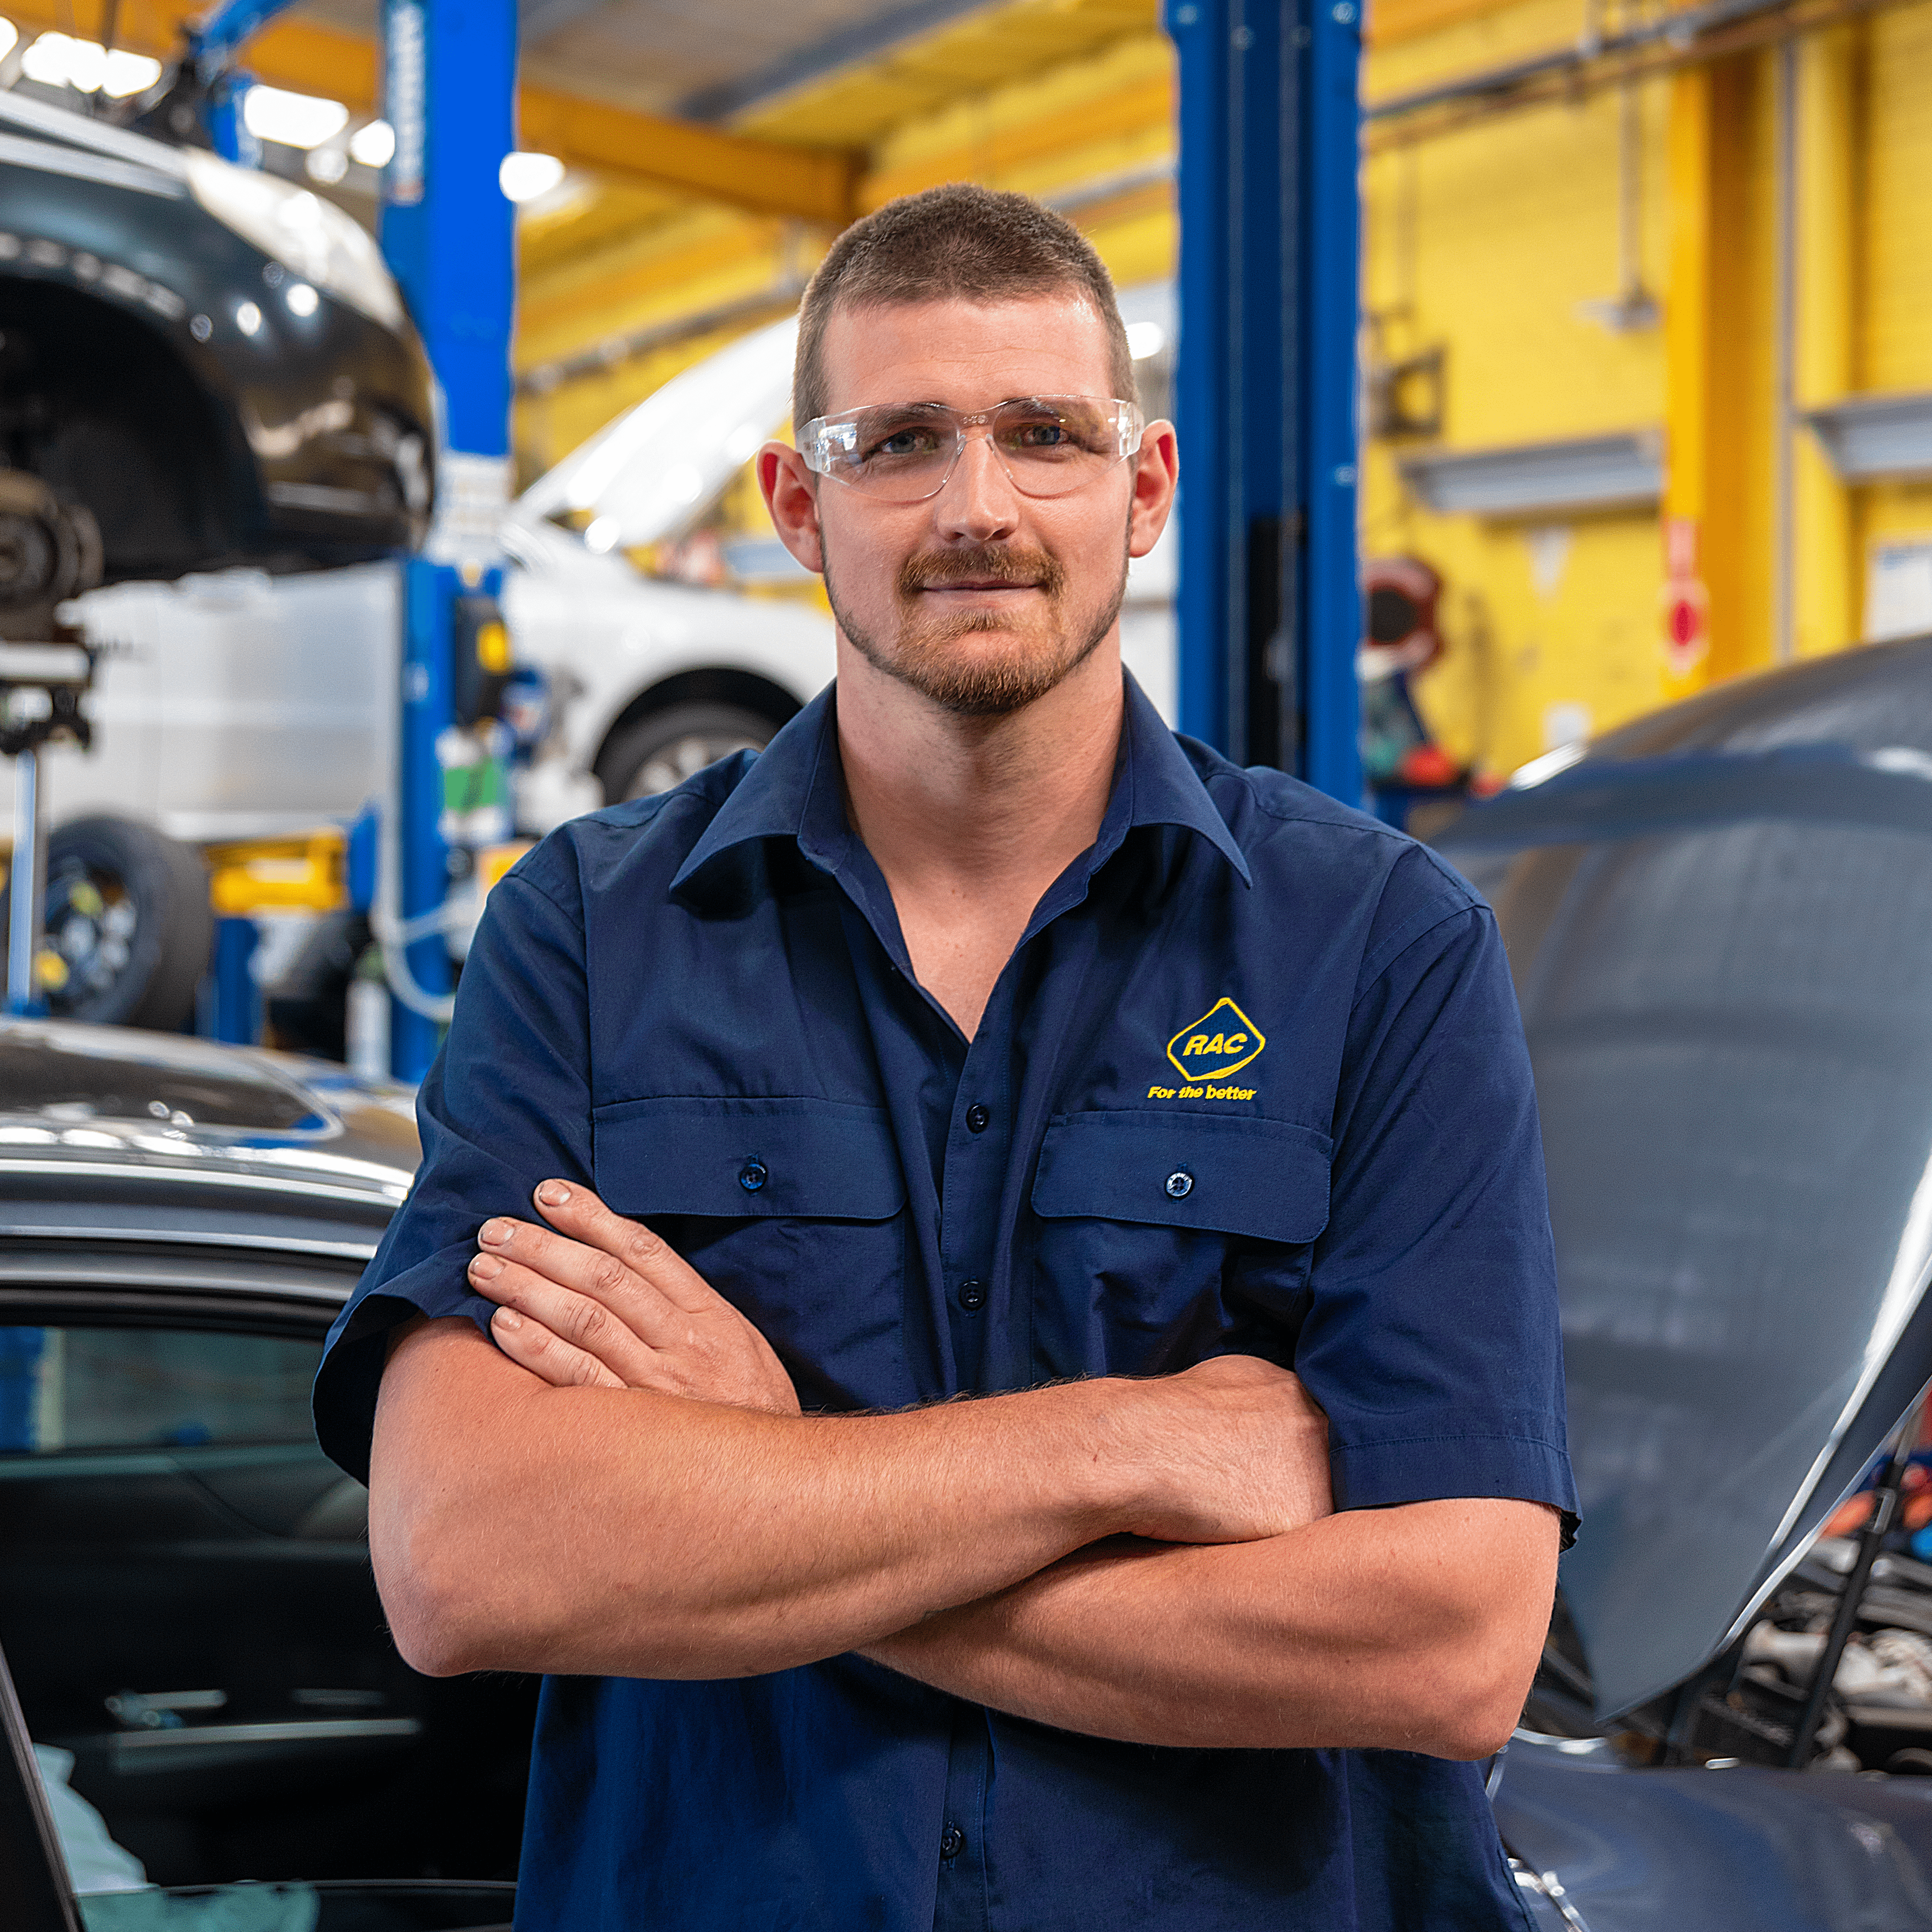 An RAC auto mechanic is standing in front of a car with his arms crossed, smiling